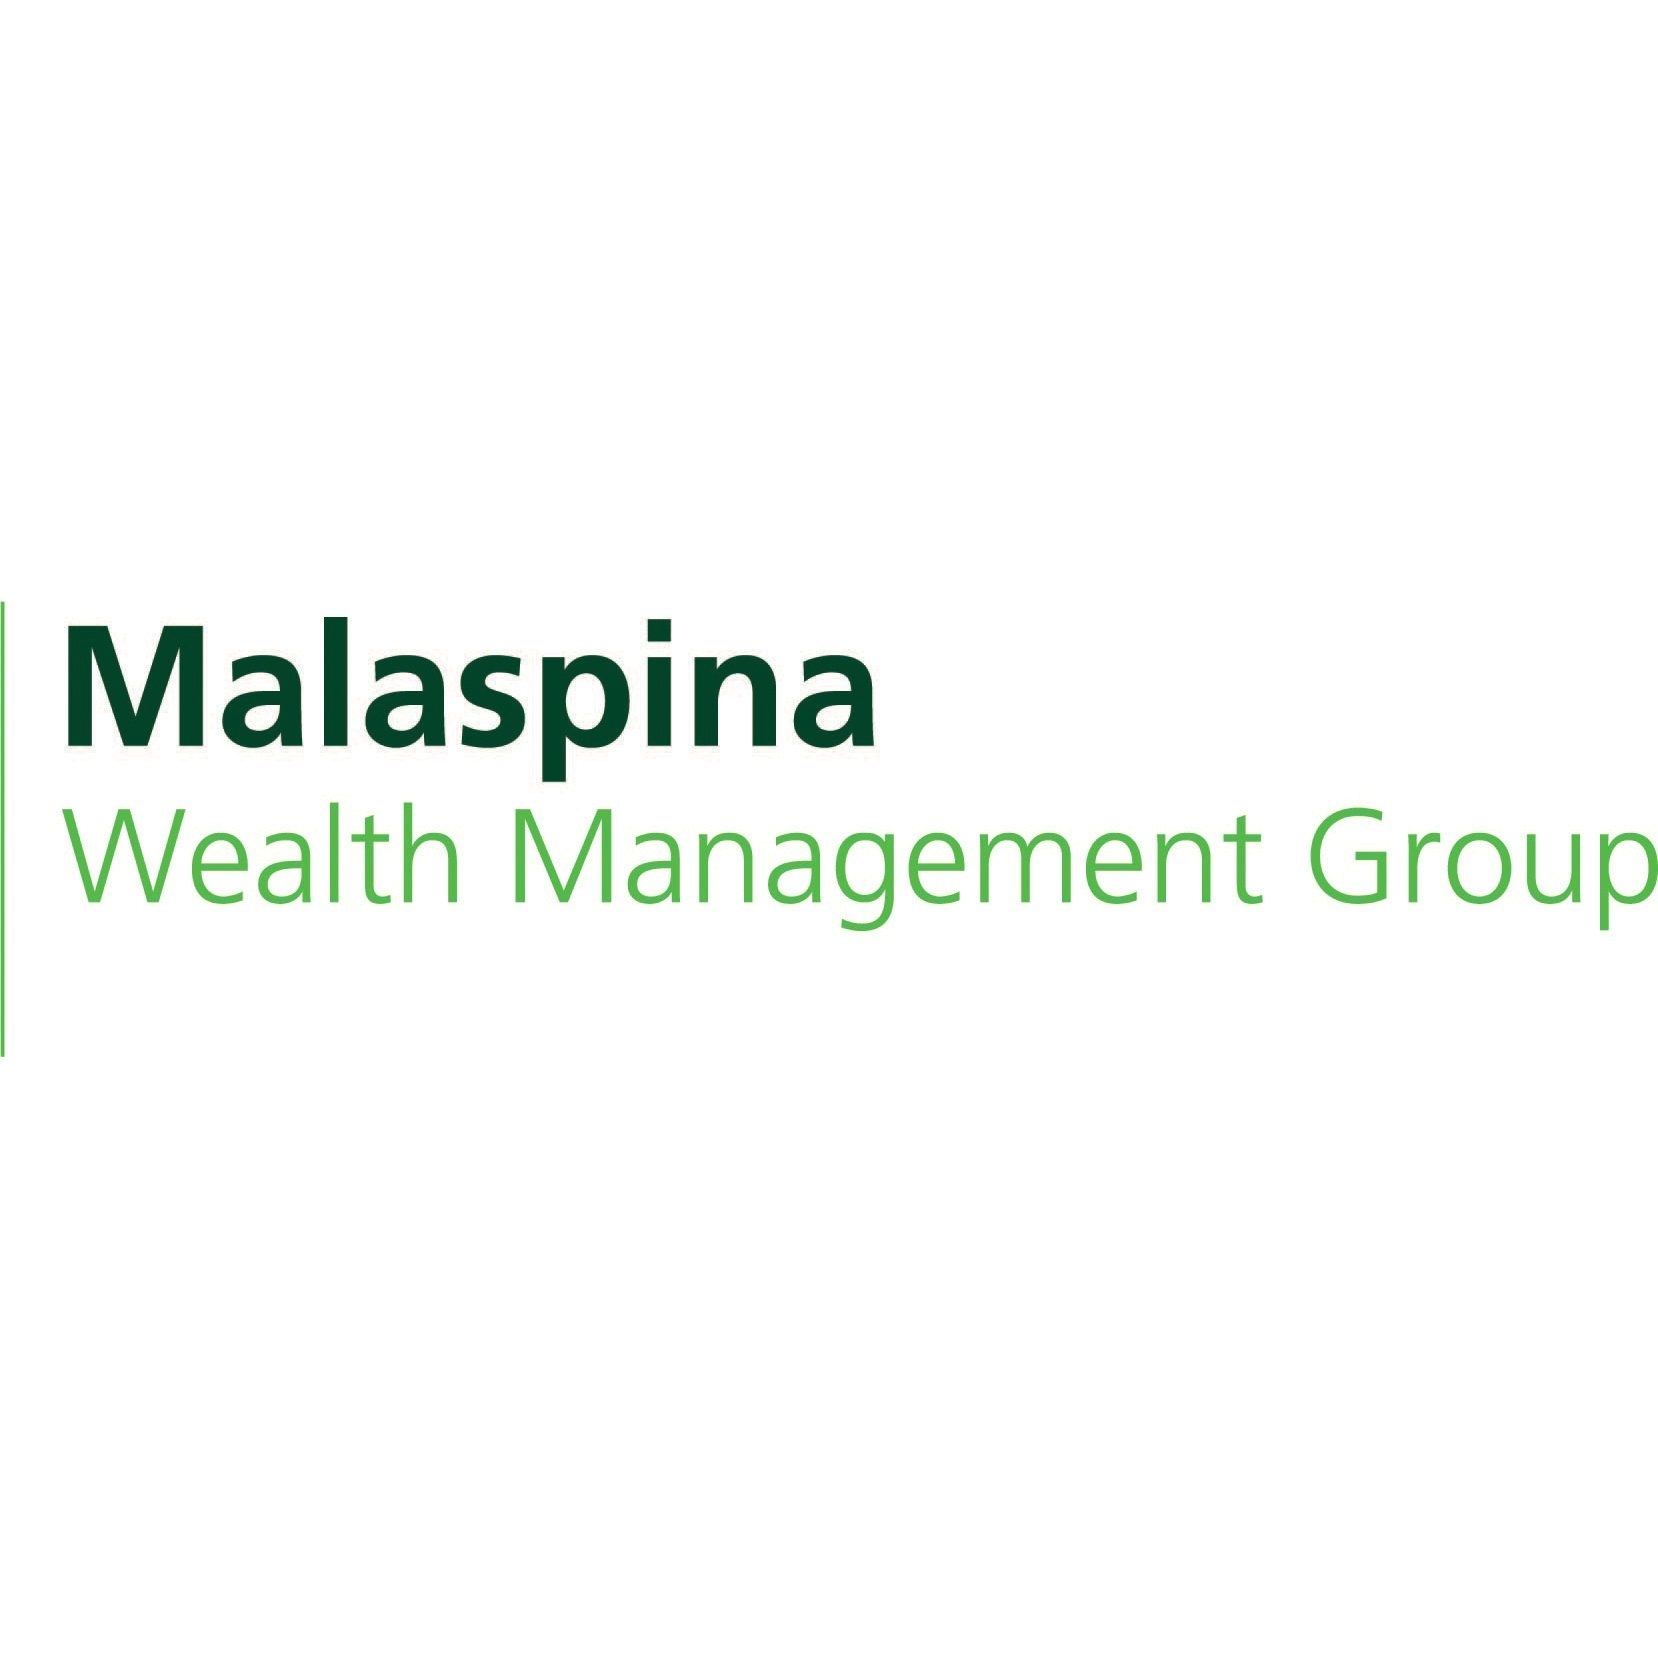 Malaspina Wealth Management Group - TD Wealth Private Investment Advice - Investment Advisory Services